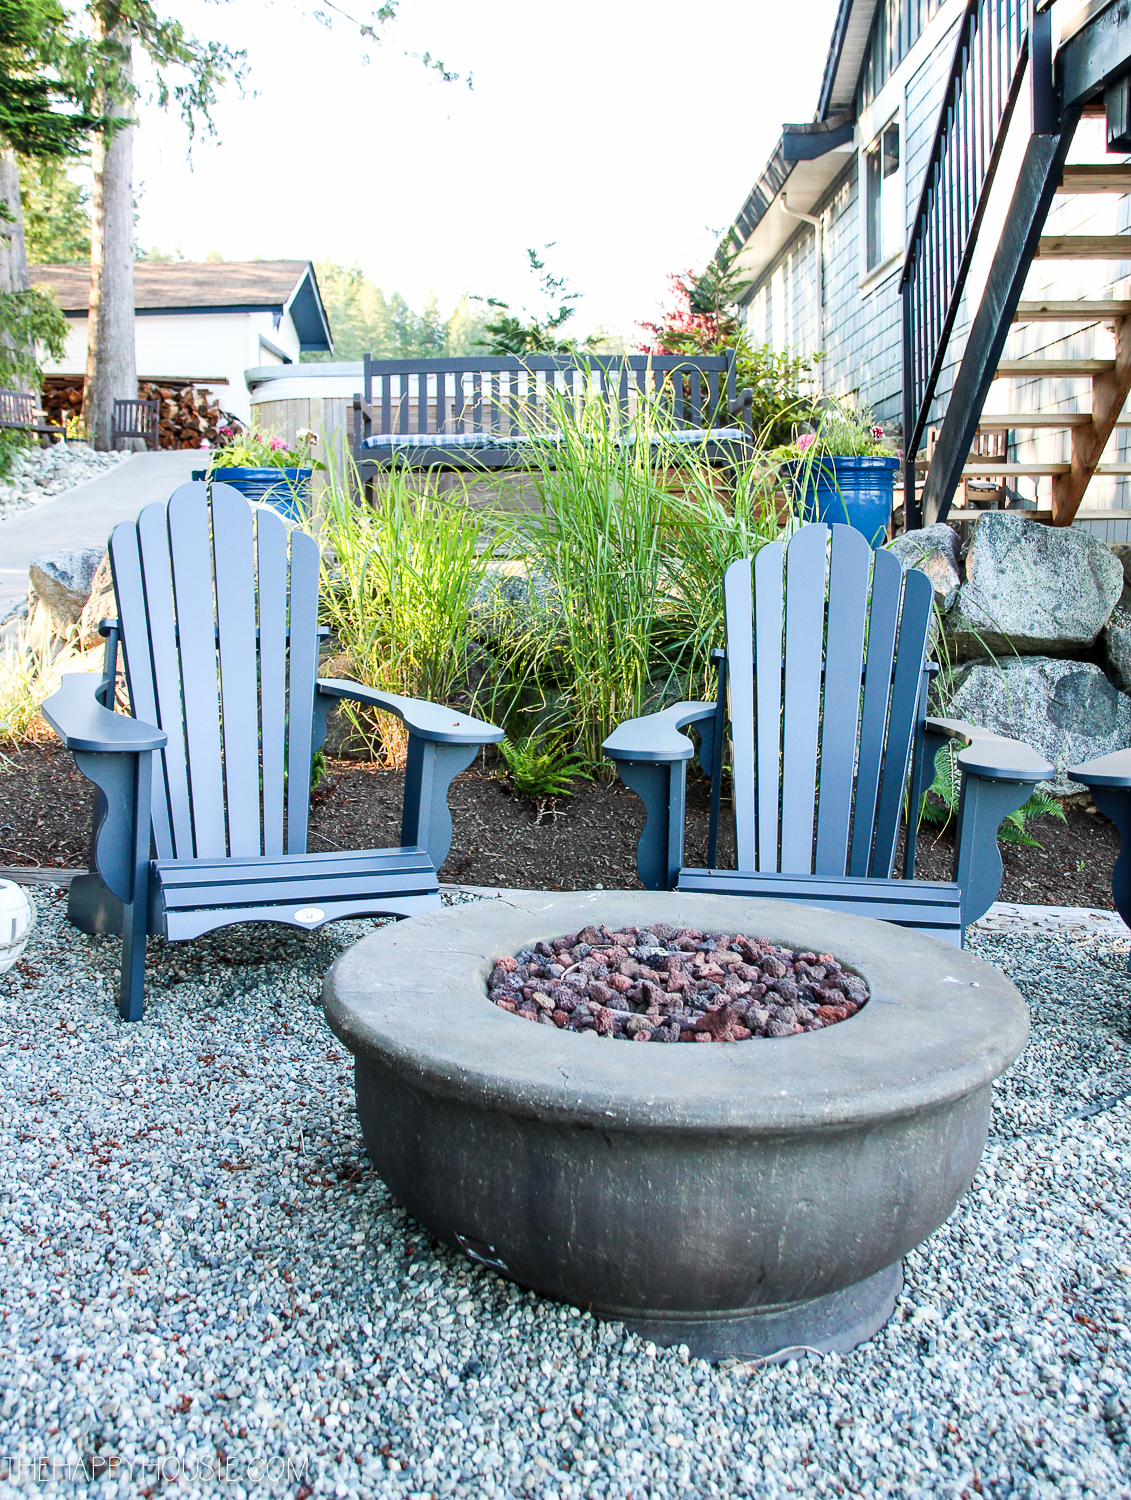 Adirondack chairs and a fire bowl sitting area